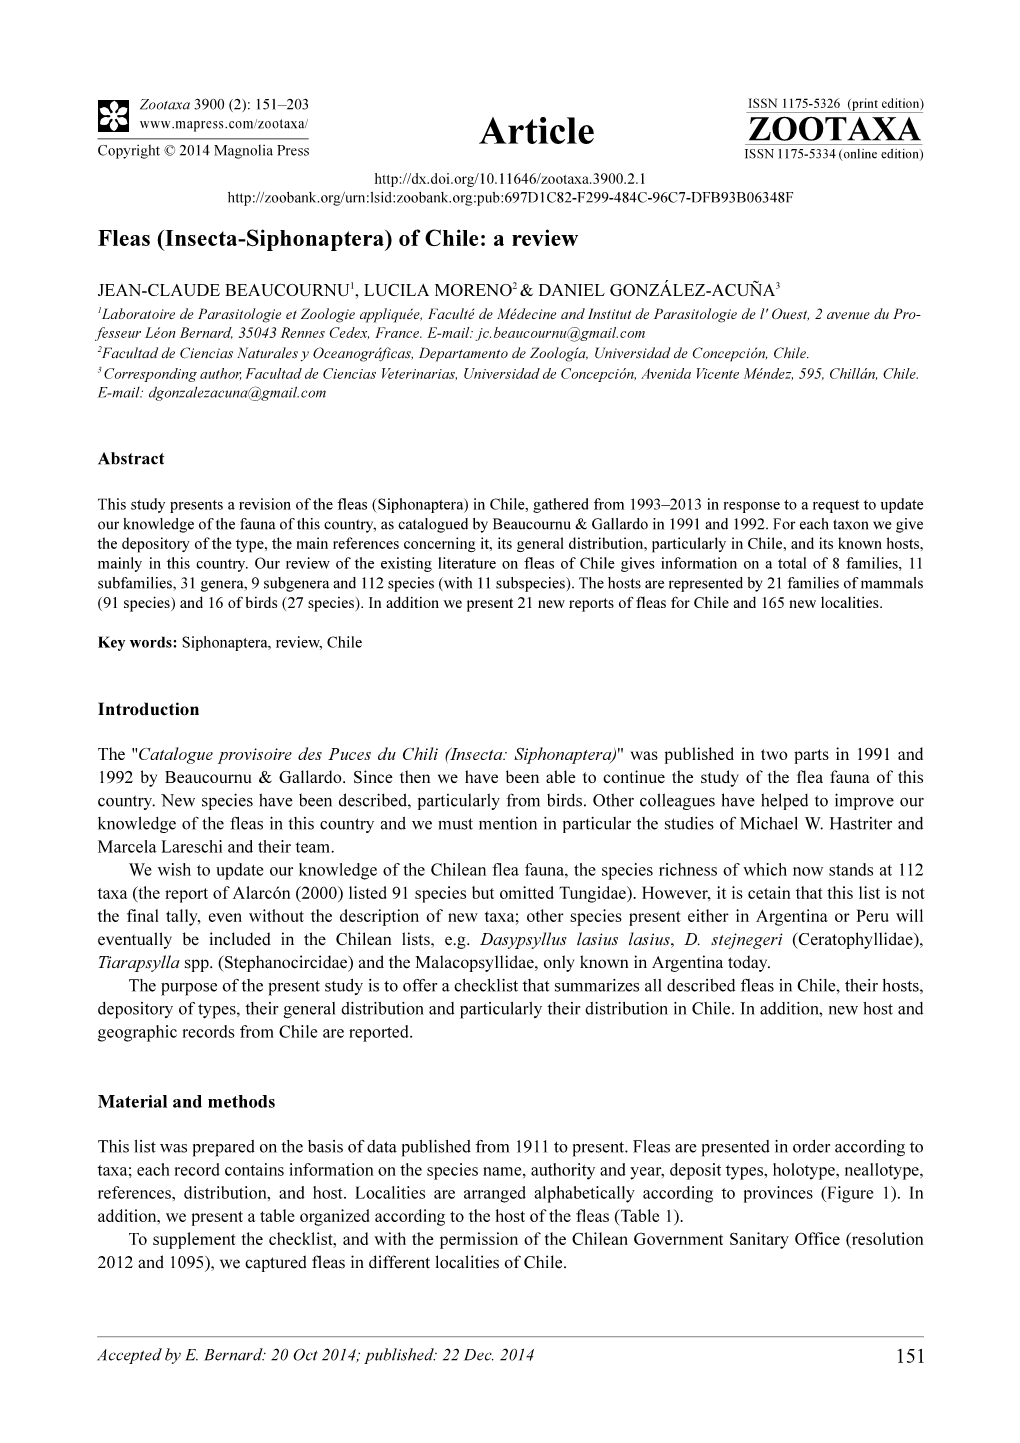 Fleas (Insecta-Siphonaptera) of Chile: a Review